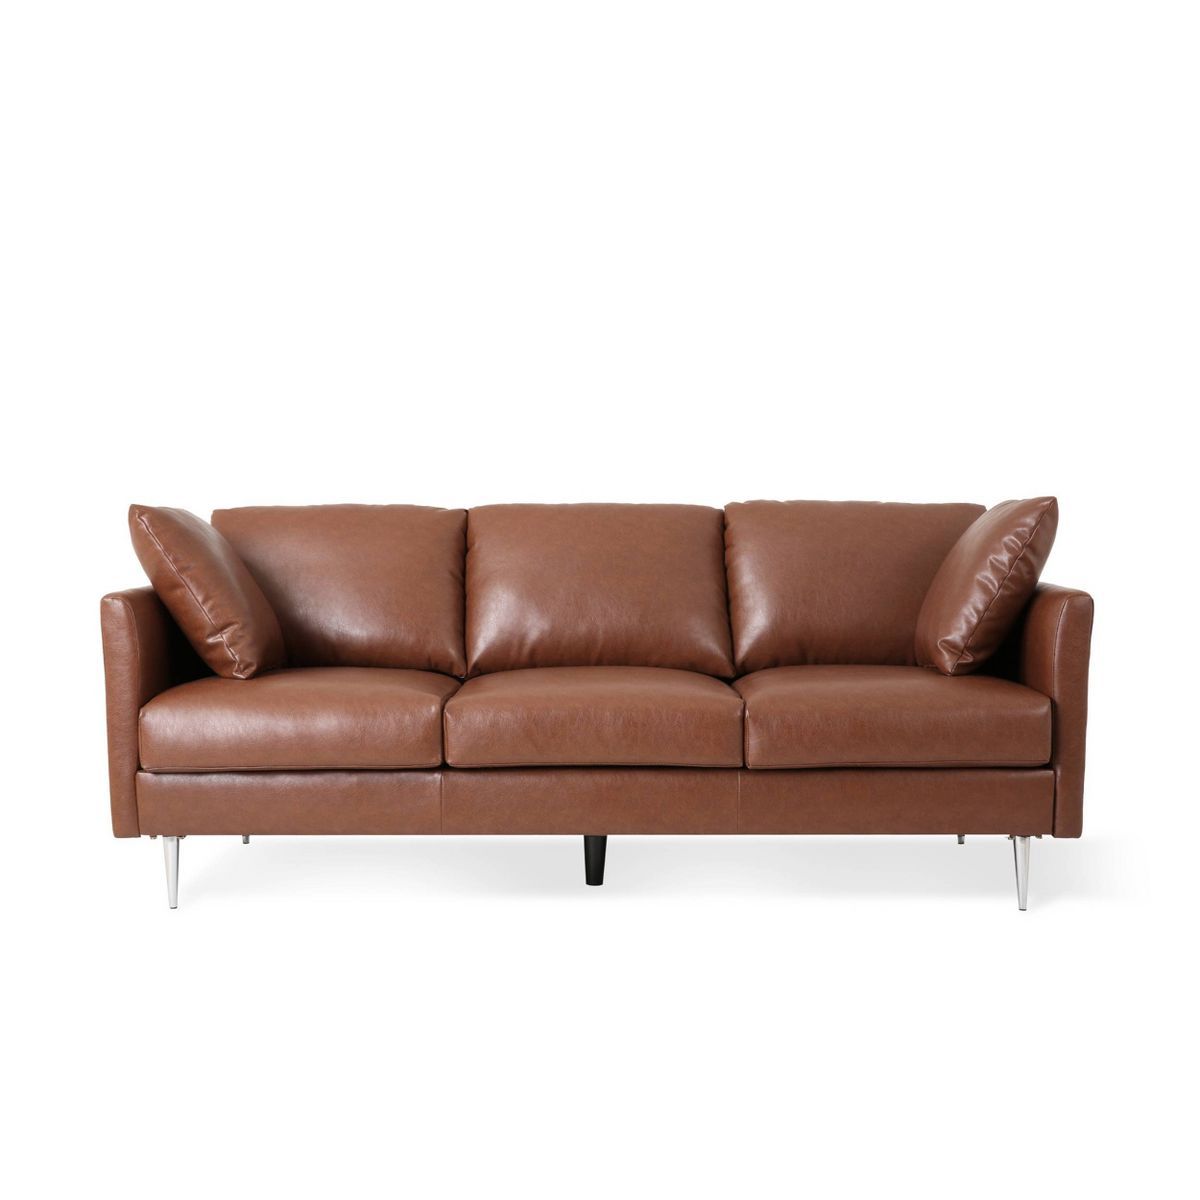 Brockbank Modern Faux Leather 3 Seater Sofa with Pillows - Christopher Knight Home | Target